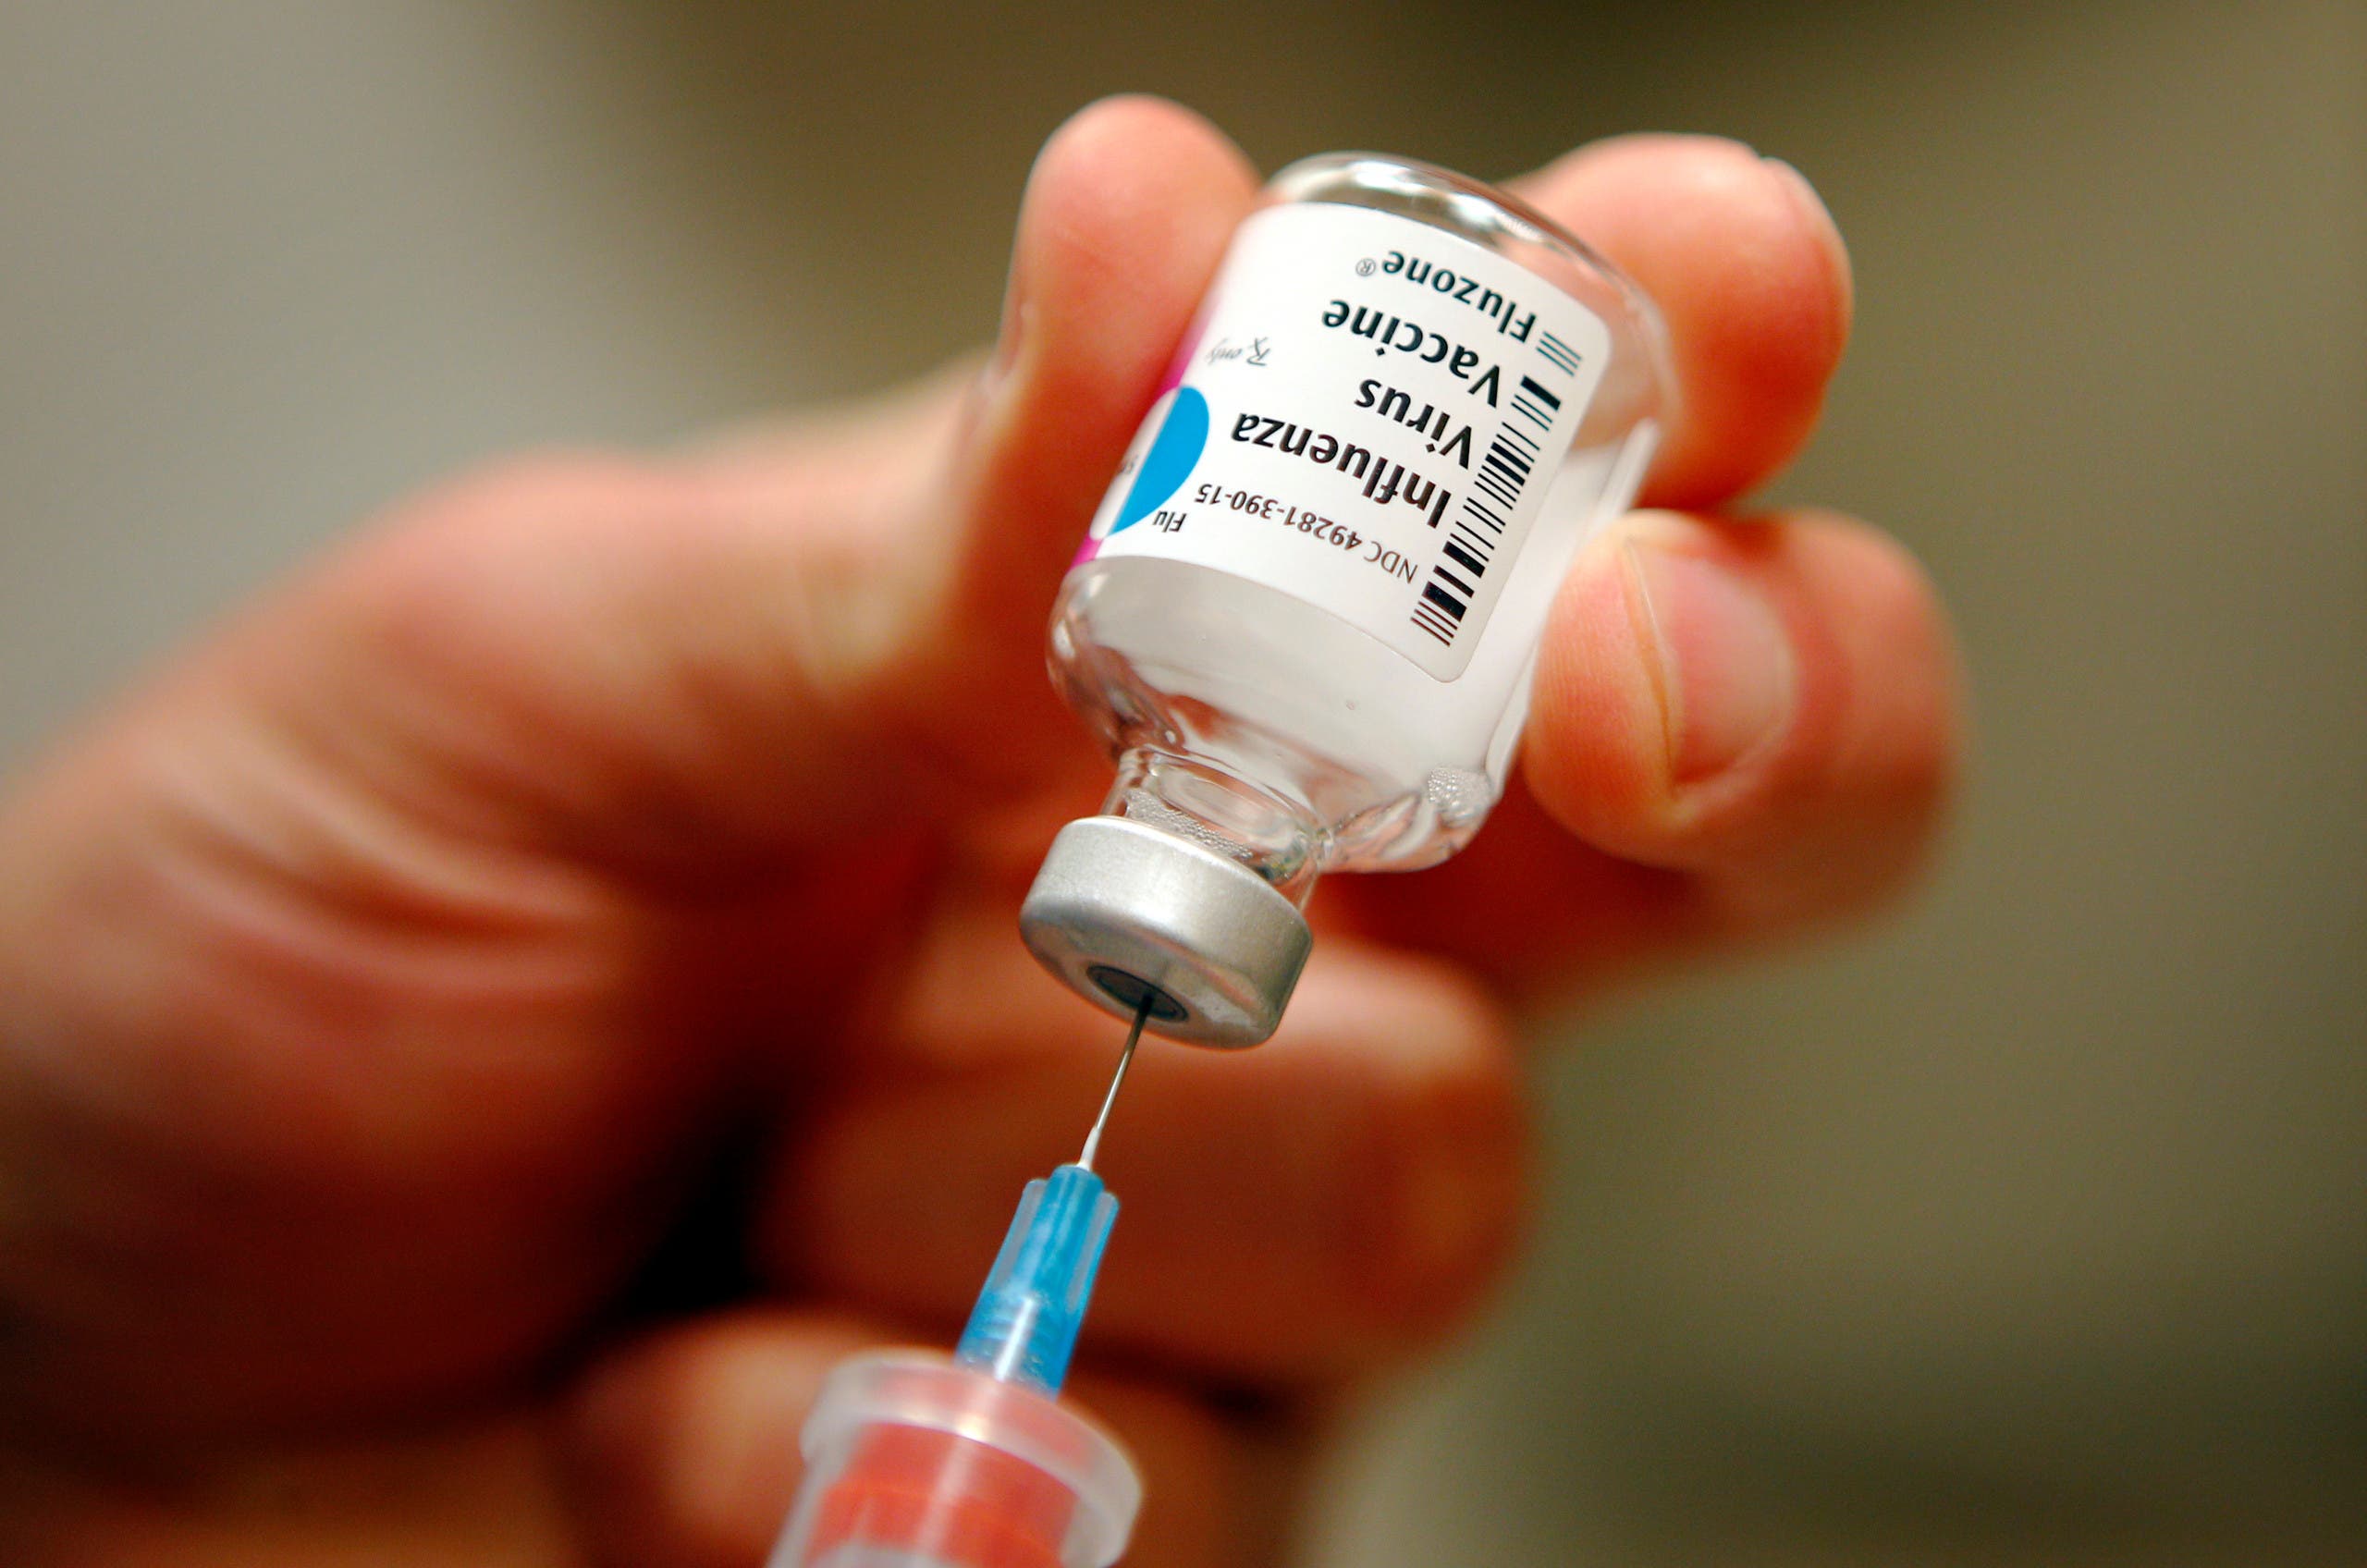 A nurse prepares an injection of the influenza vaccine at Massachusetts General Hospital in Boston, Massachusetts. (File photo: Reuters)